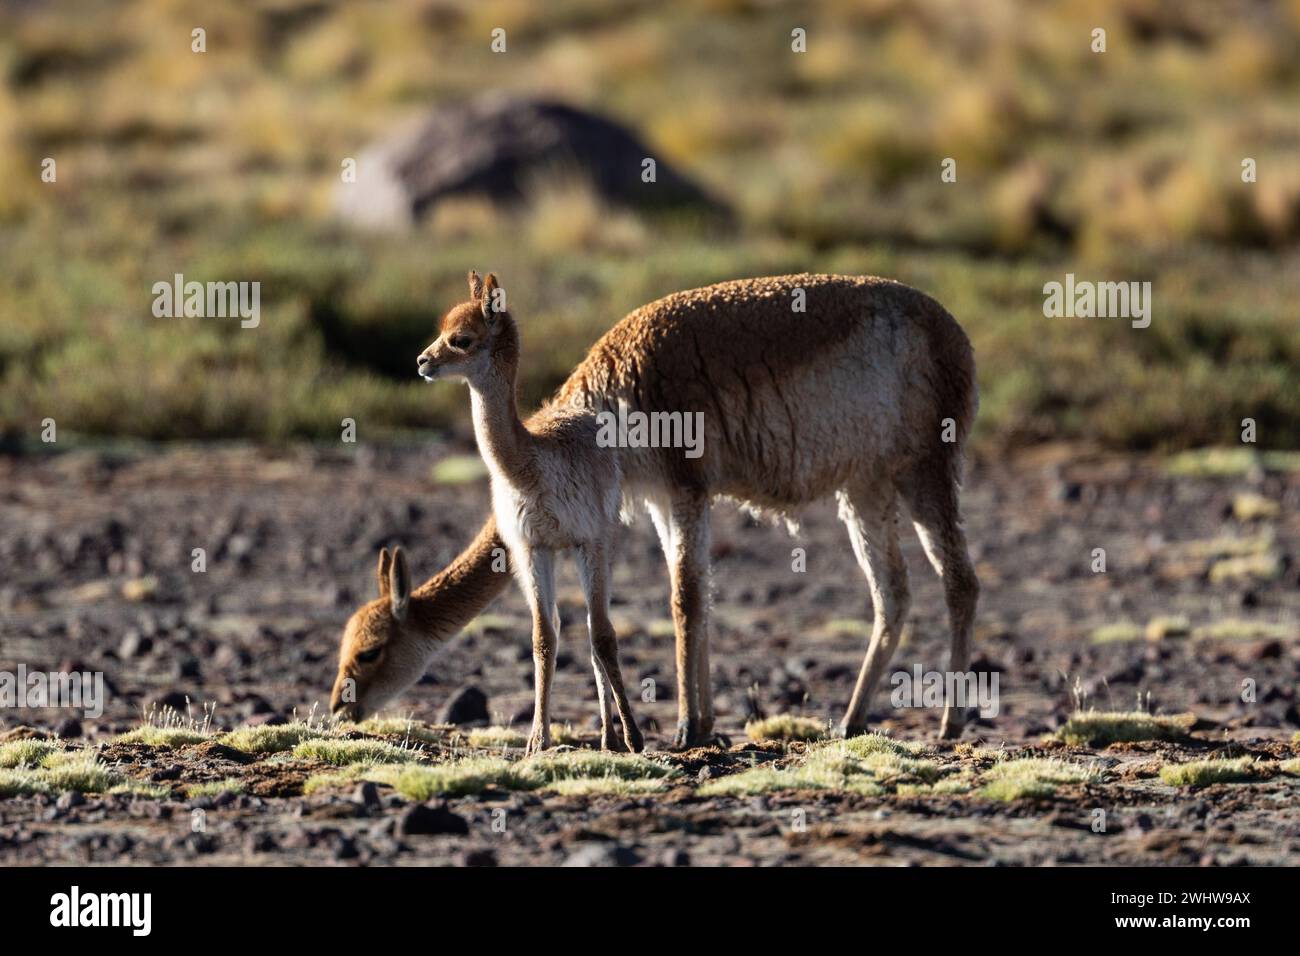 A young vicuna stands grazing with its mother in the Chilean grasslands of the Atacama Desert. Stock Photo